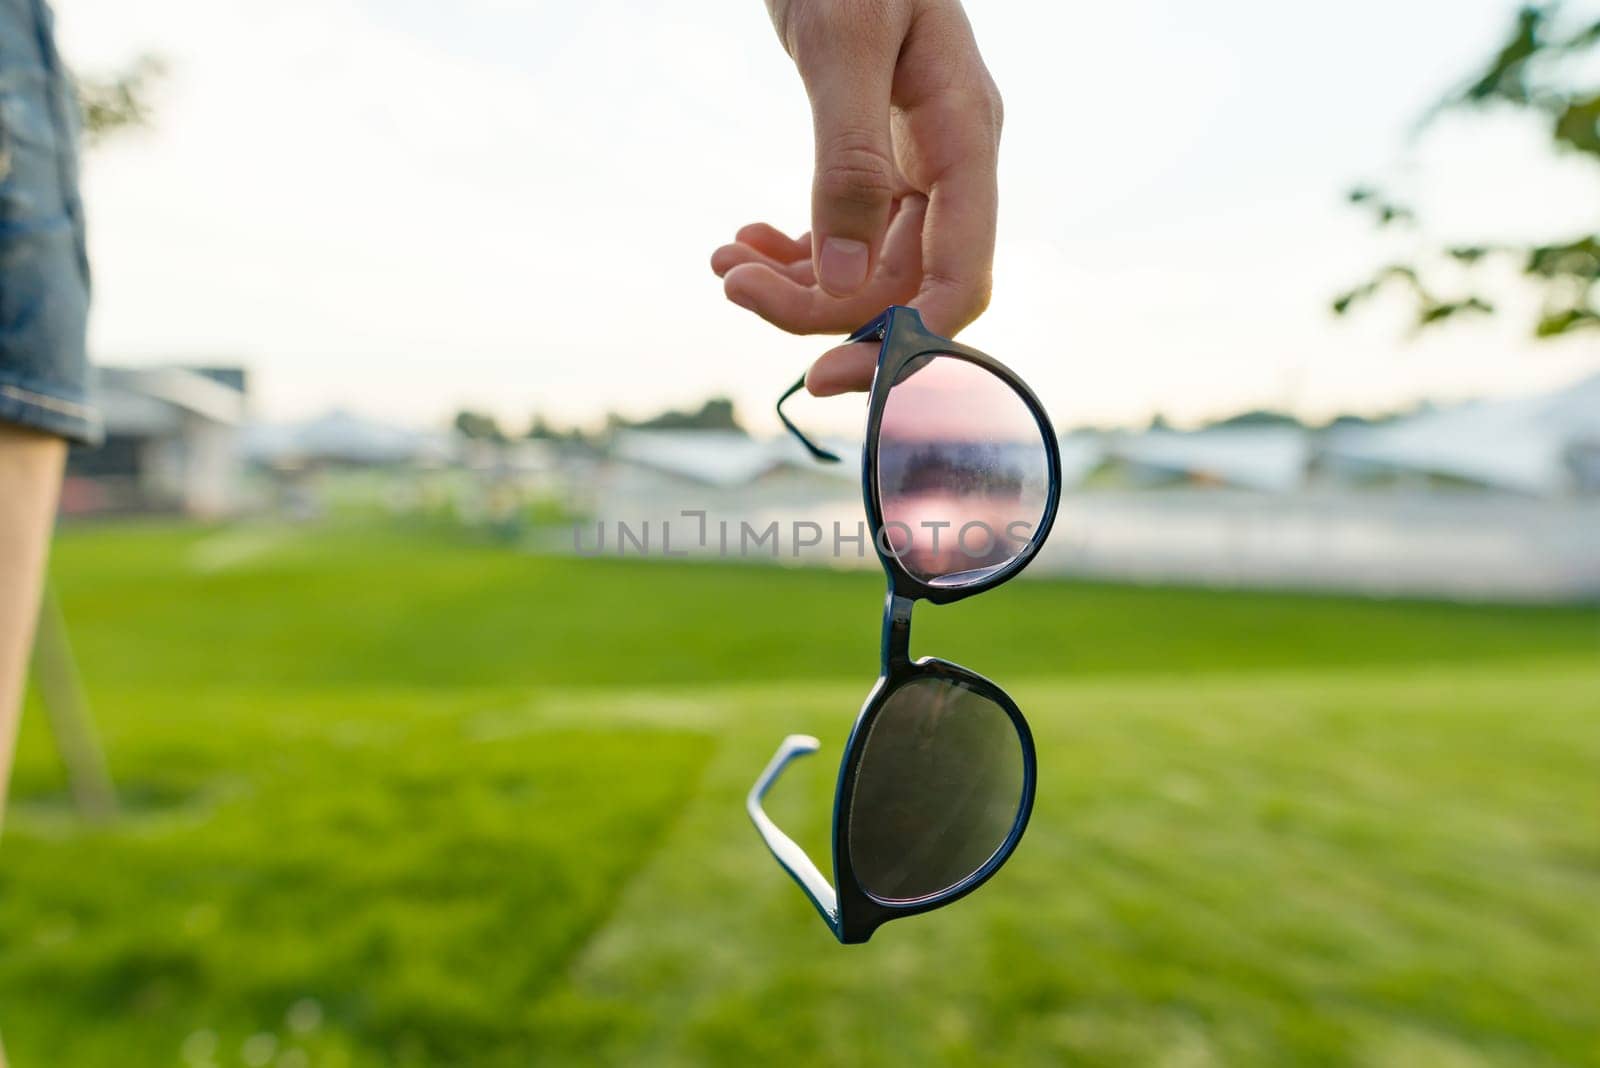 Sunglasses symbol of summer, background horizon with sunset, green lawn.